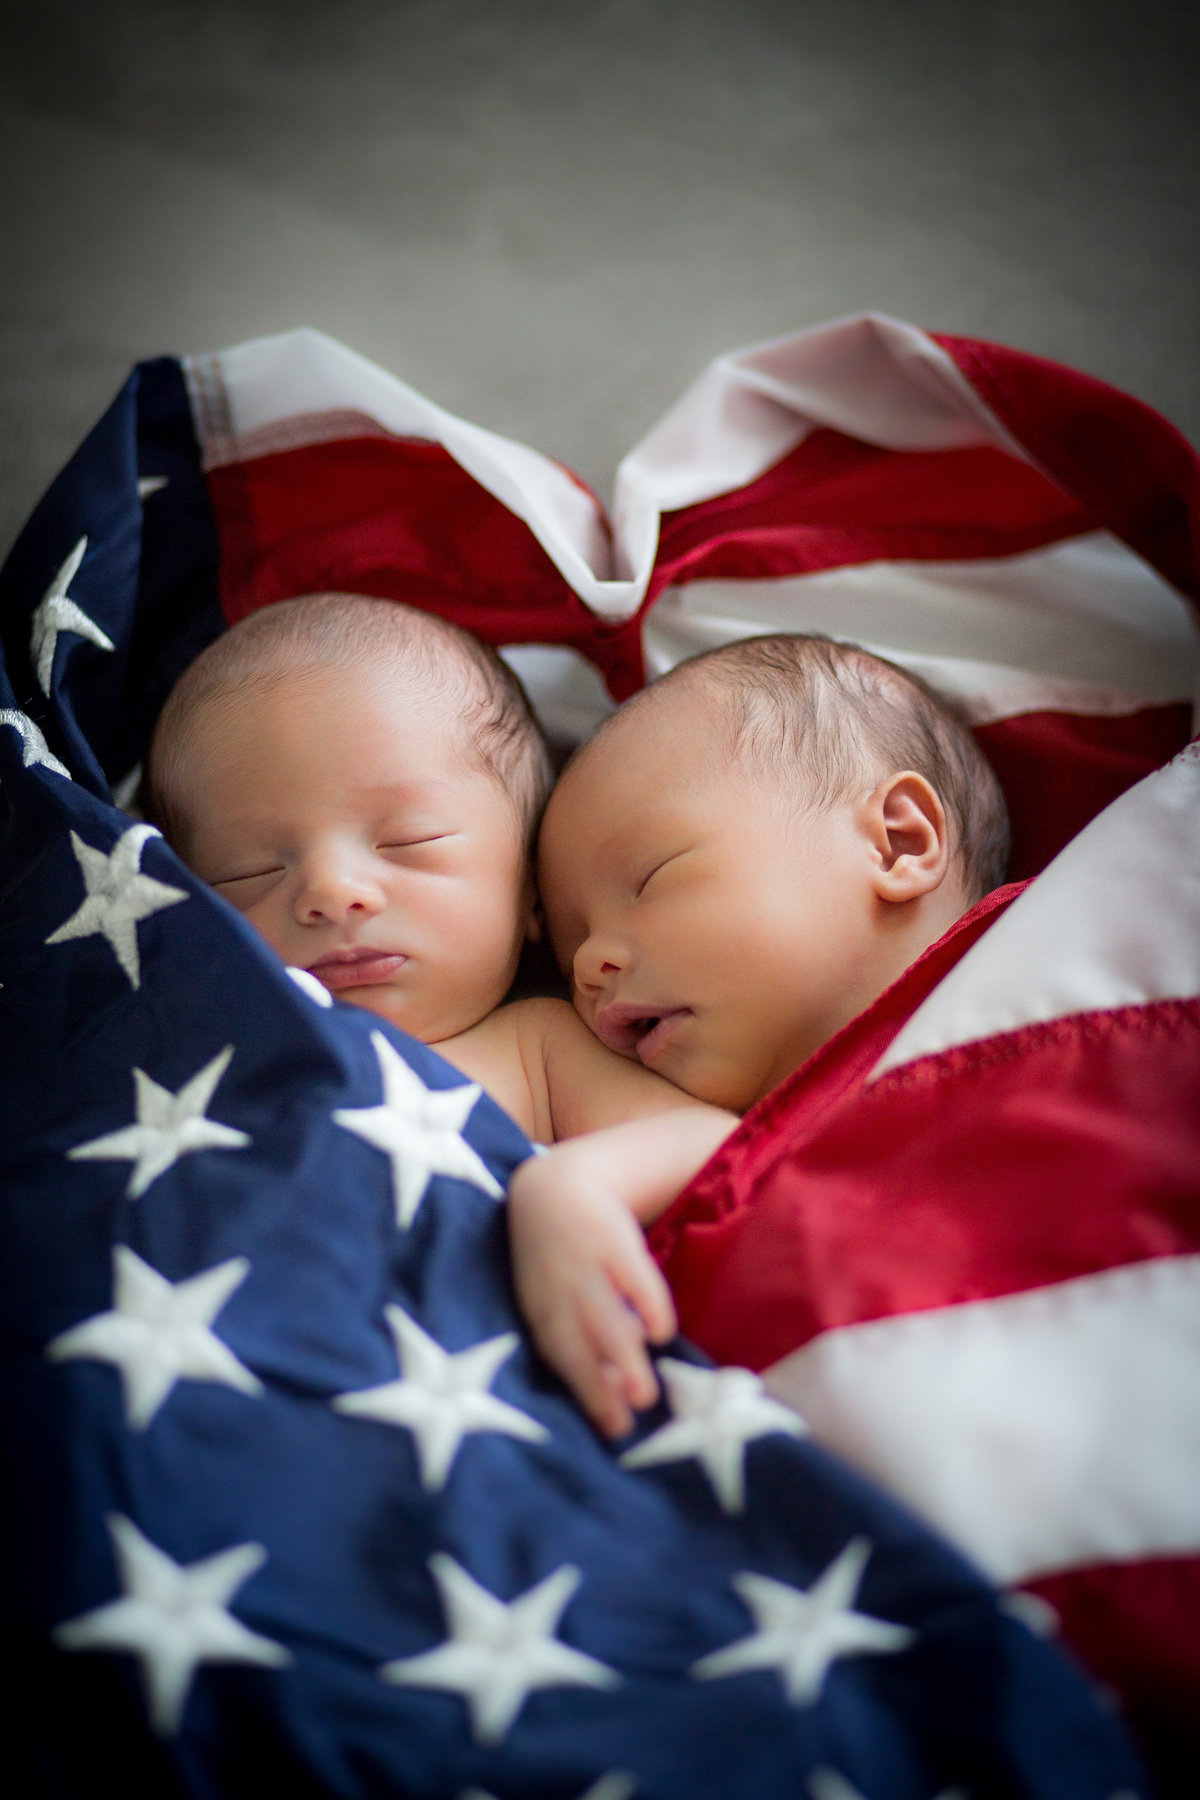 Newborn twins photography session of two infants wrapped in the American flag.